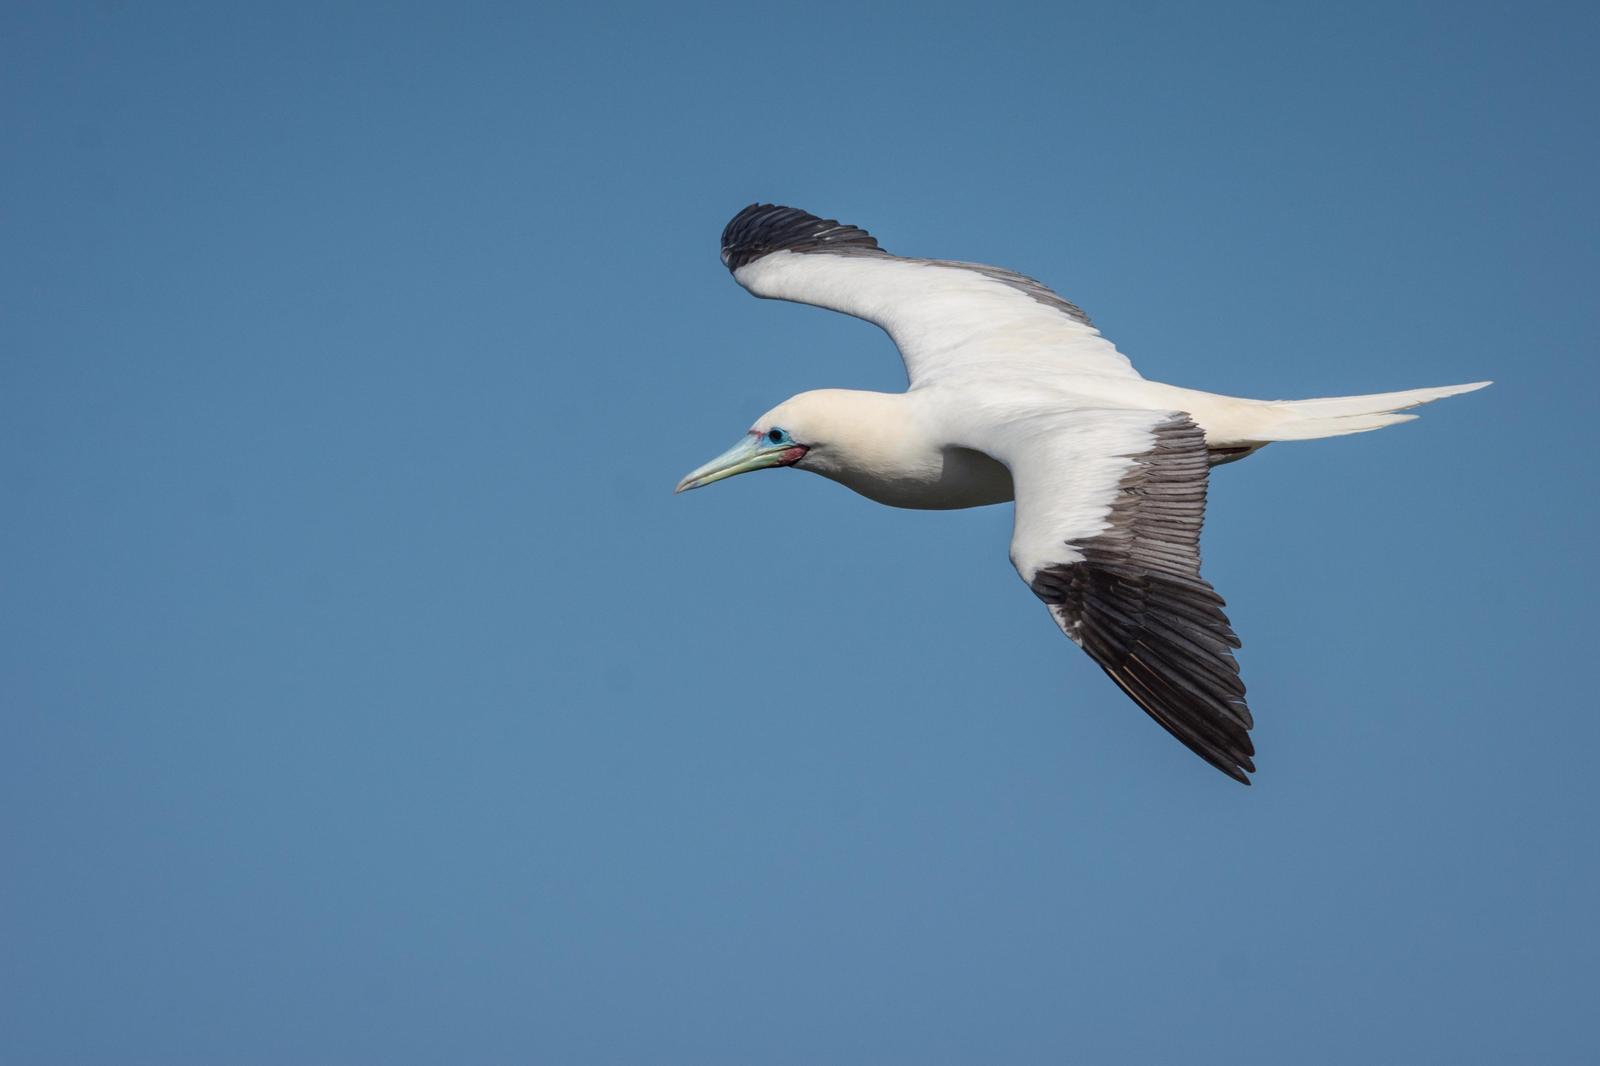 Red-footed Booby Photo by Jesse Hodges